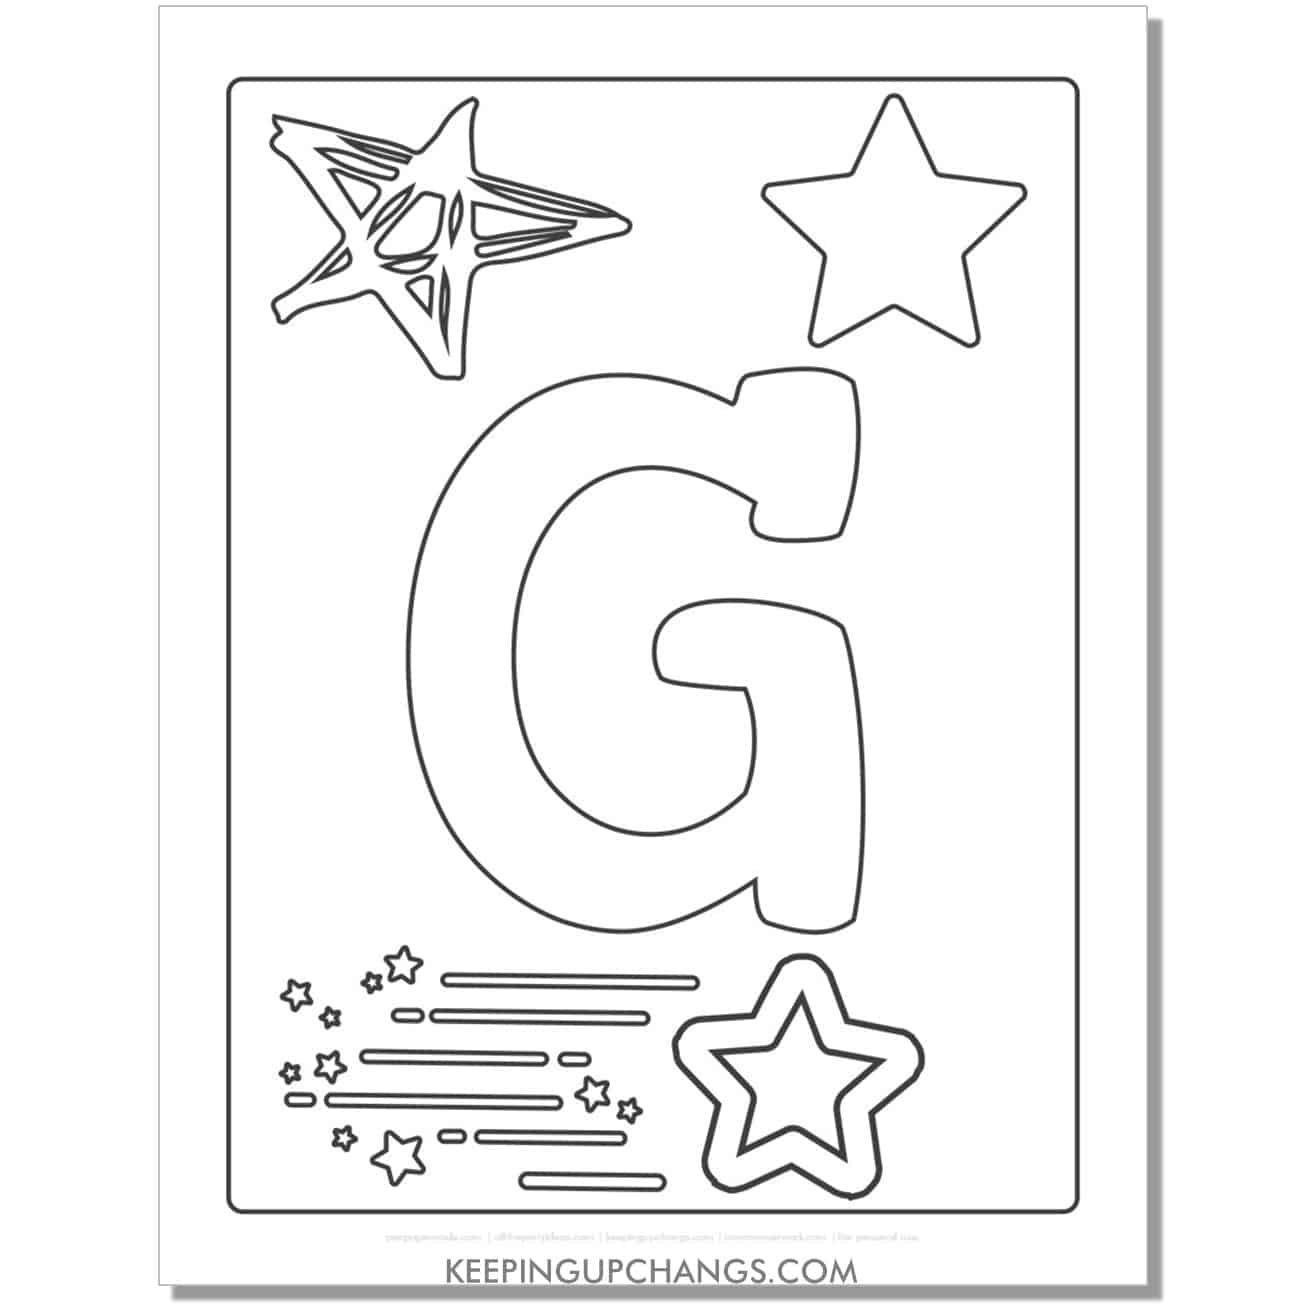 cool letter g to color with stars, space theme.